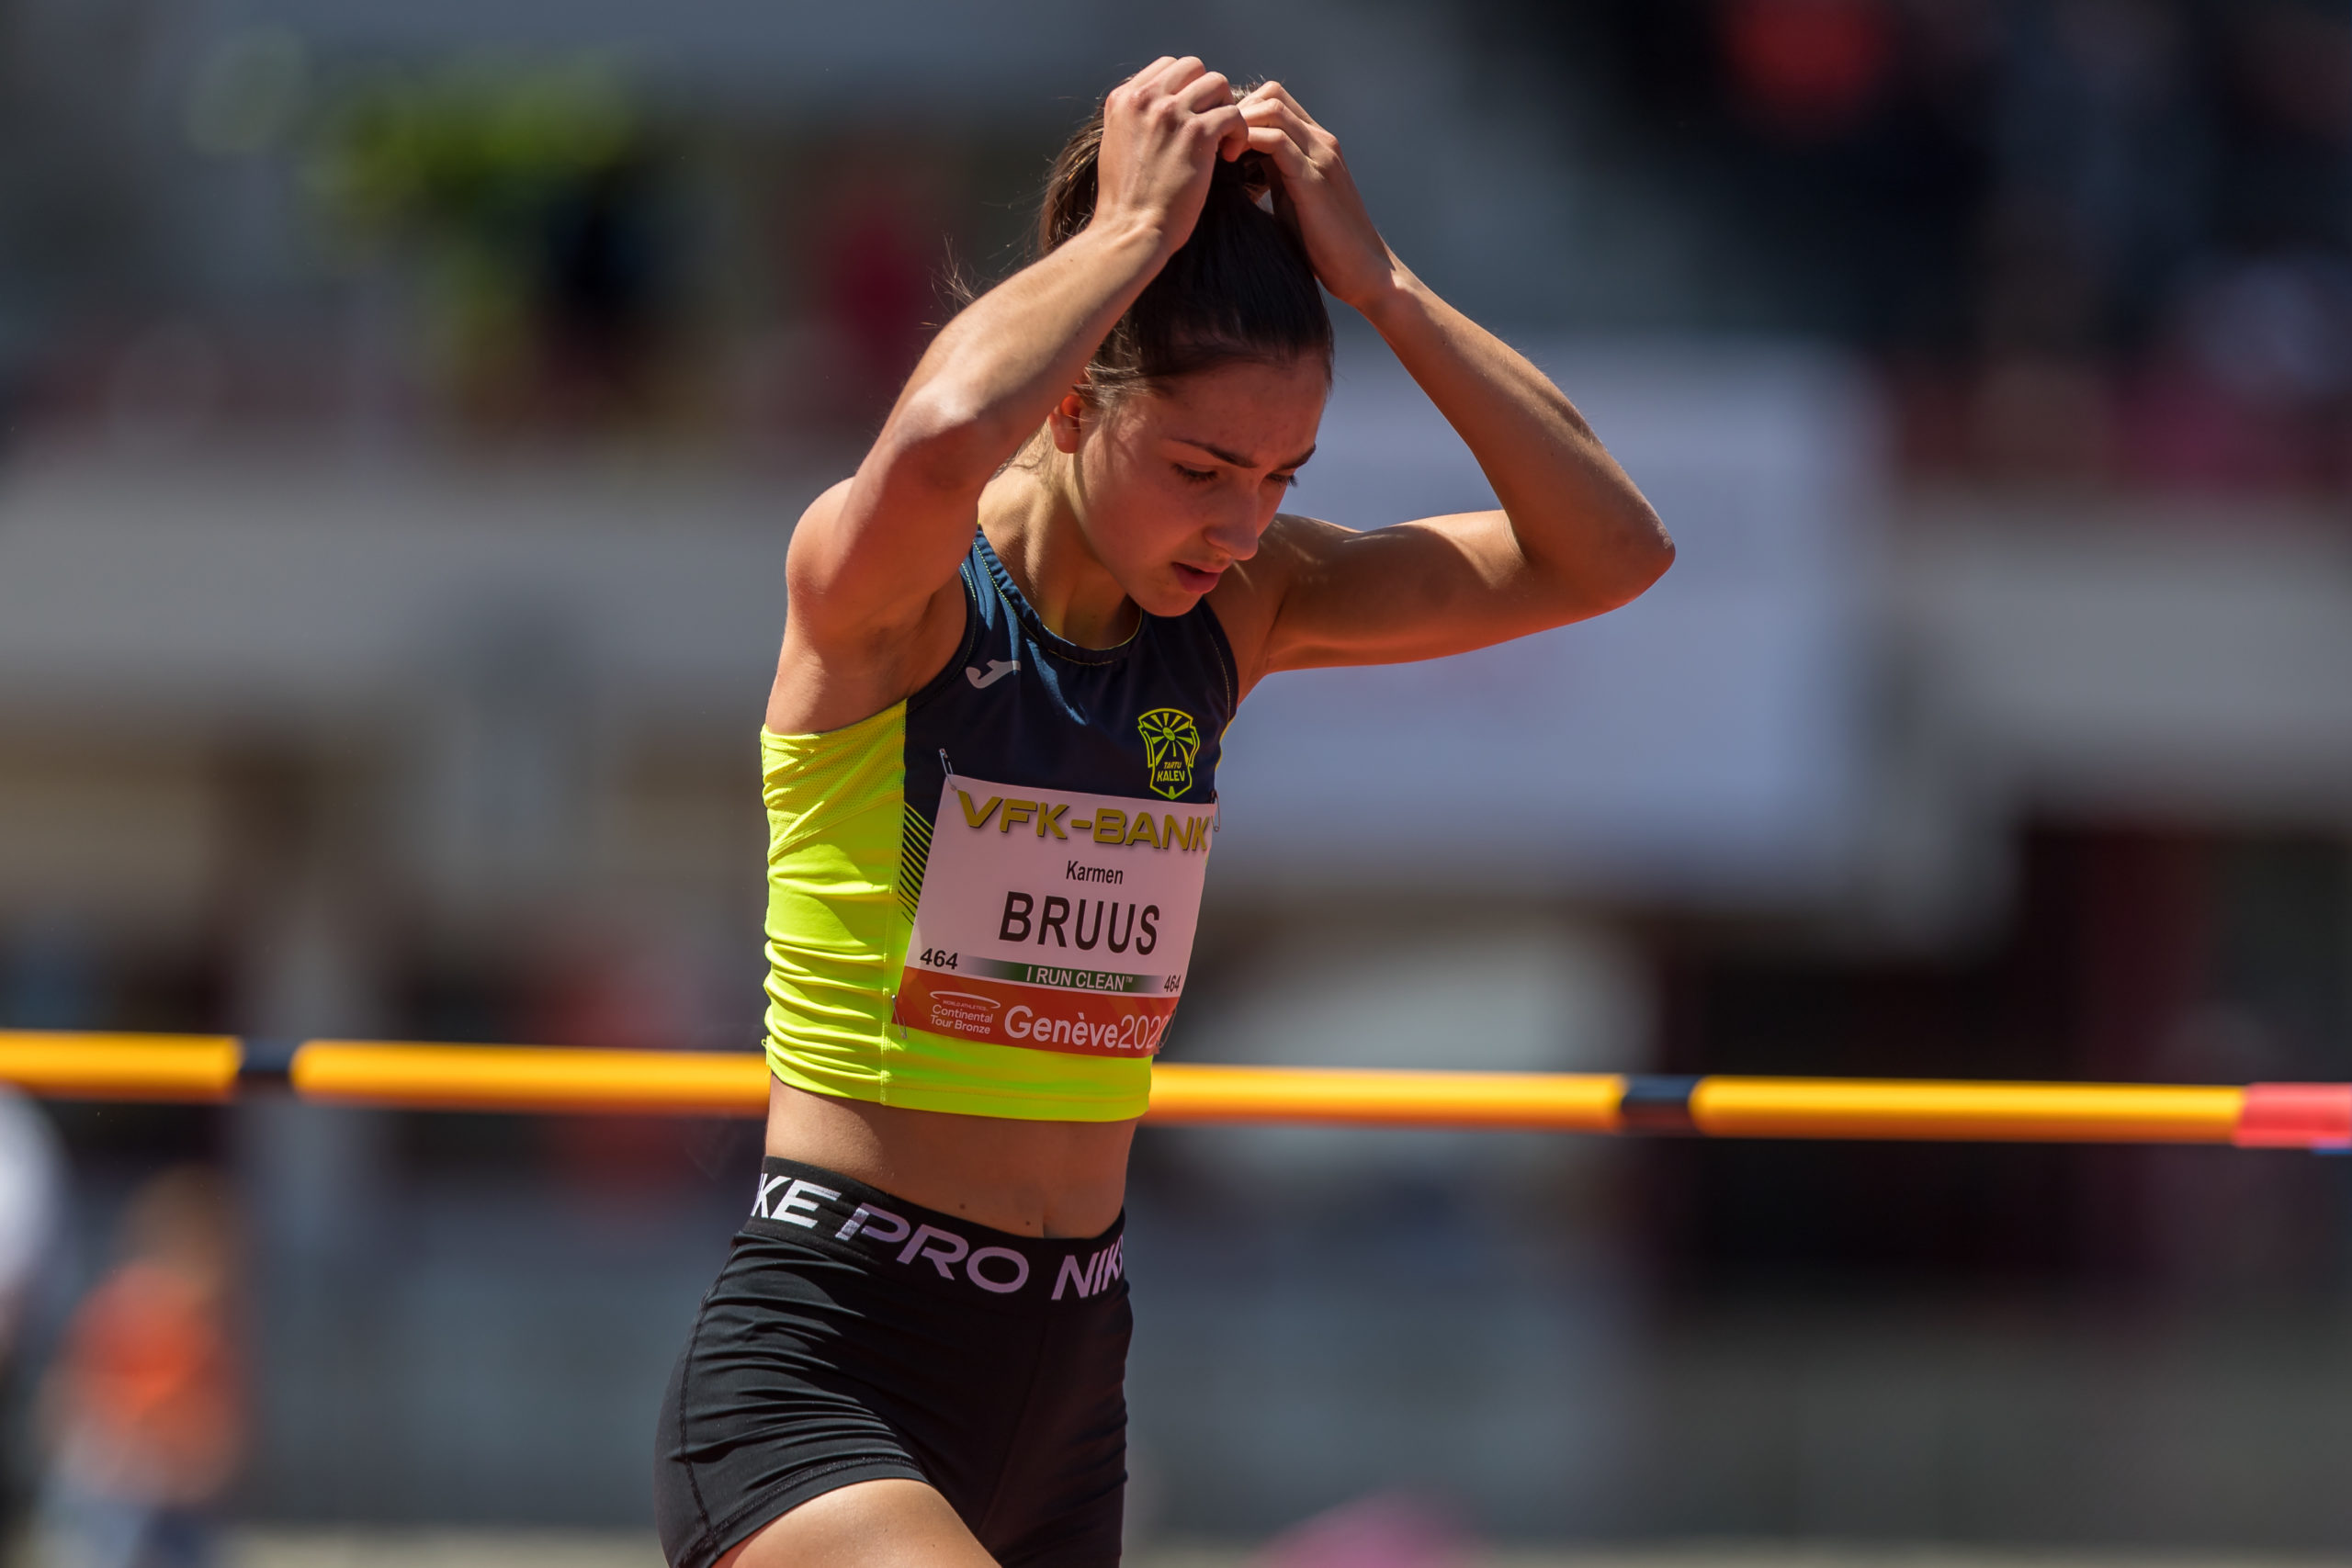 The prodigious Karmen BRUUS (EST) (2005), with 17 years she finished 7th at ATLETICAGENEVE and one month later she was also 7th (!!) at the absolute World Championships in Eugene Oregon 2022 with 1.96 !